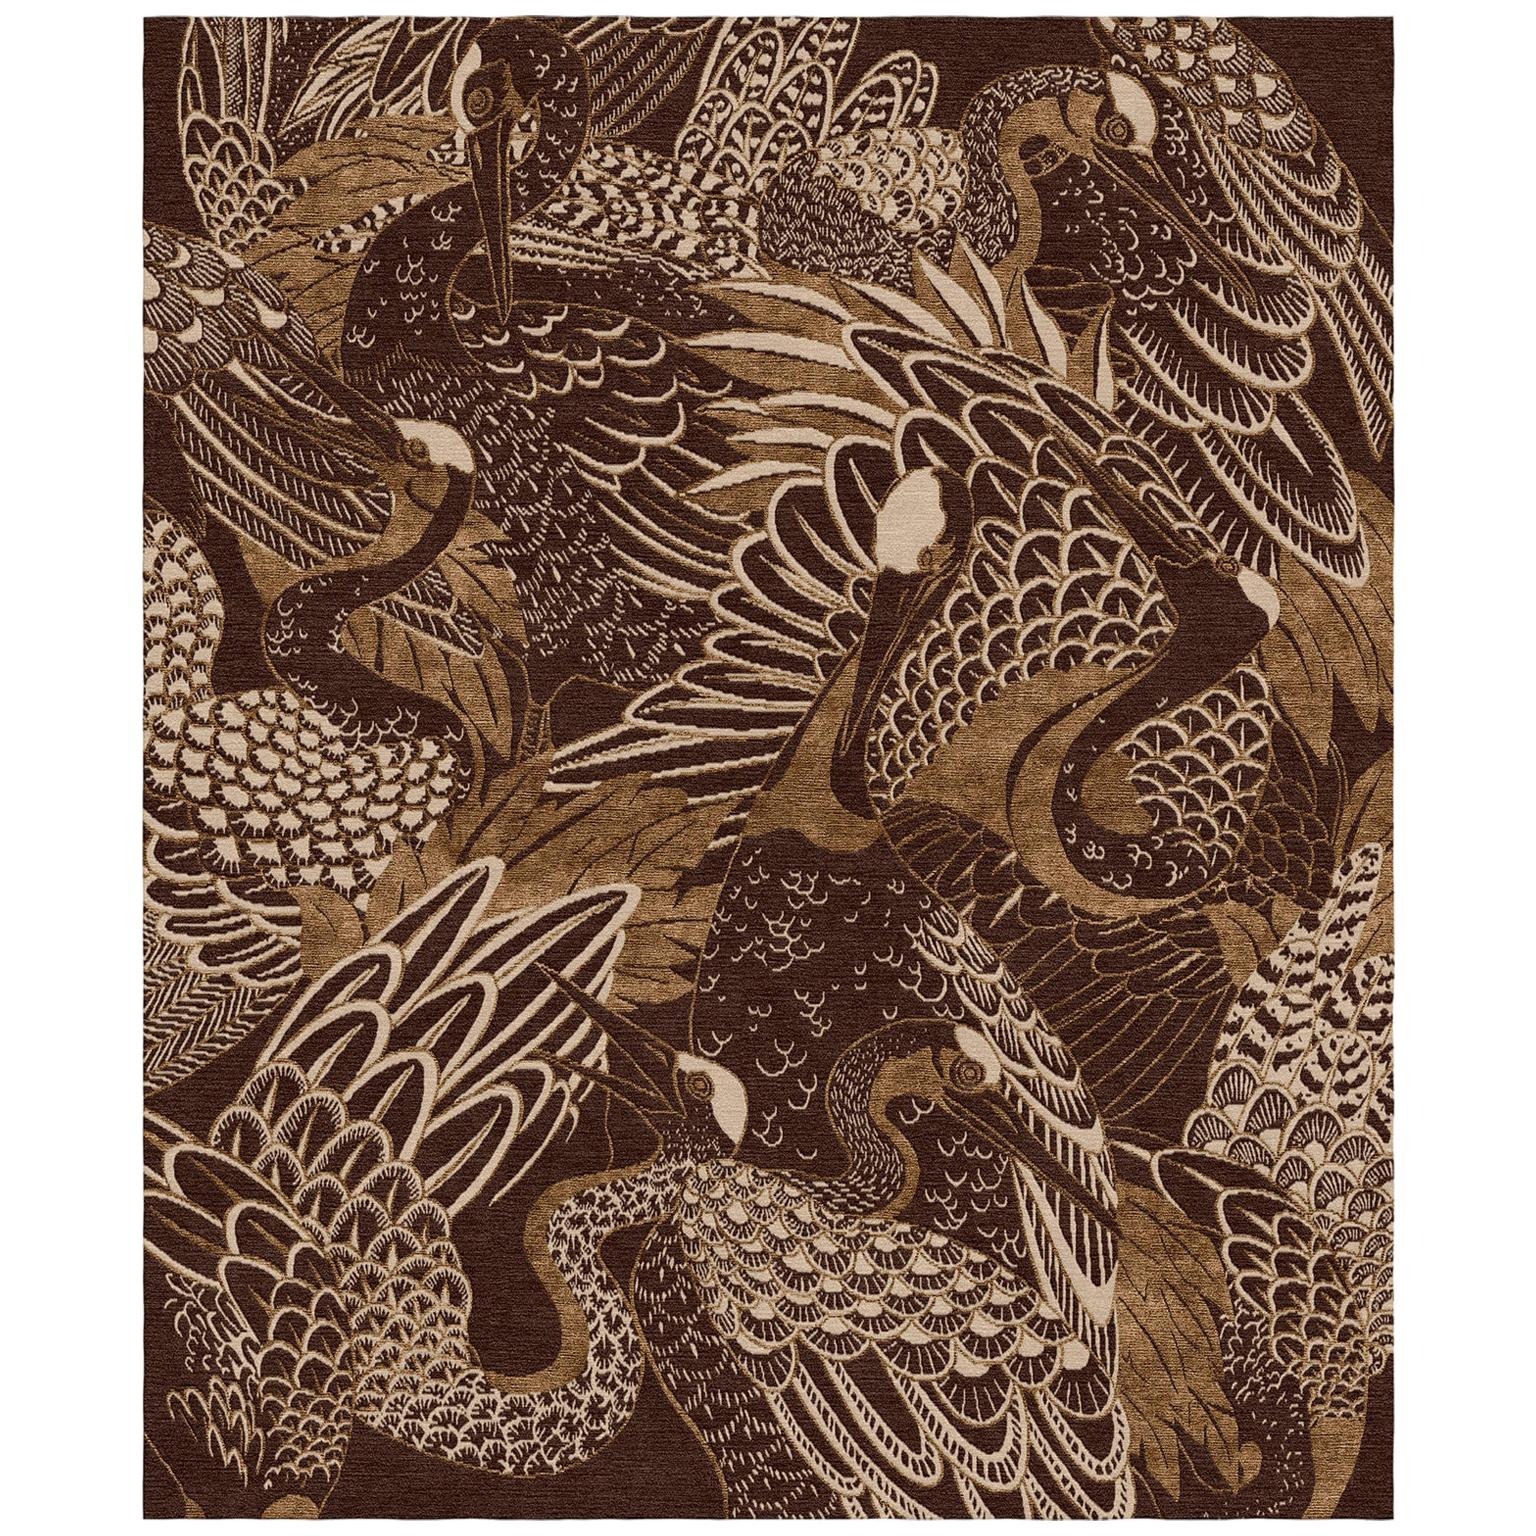 Movement - Animalistic Dark Hand Knotted Wool Bamboo Silk Rug For Sale